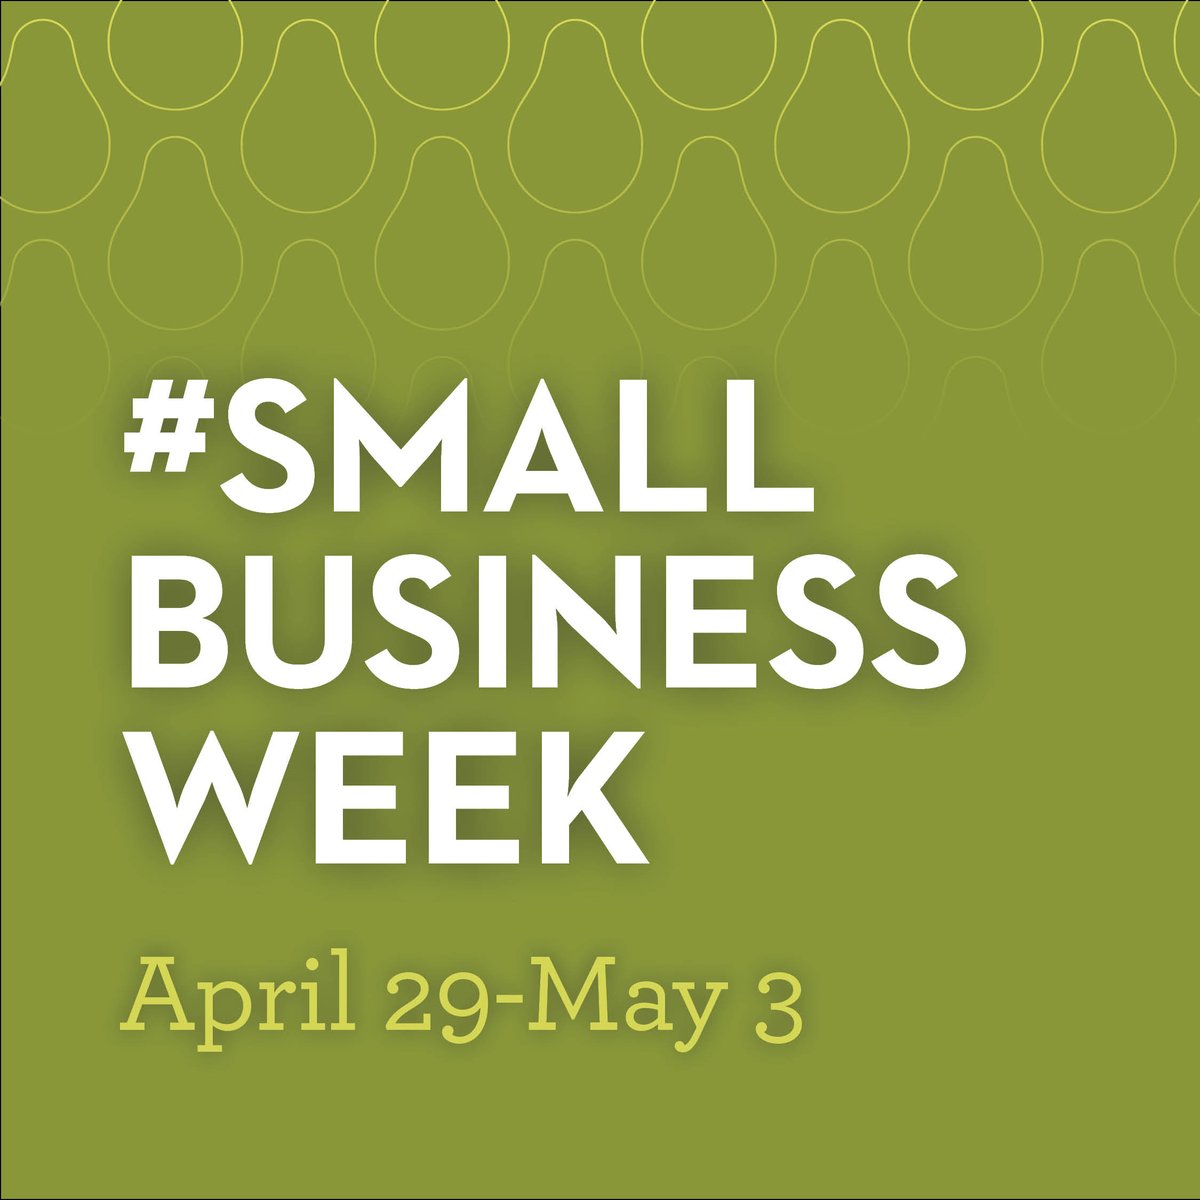 It's National Small Business Week (April 29 - May 3) and we're celebrating you! The Pearland community has many resources to help your business thrive, from the Pearland Innovation Hub, to development and workforce support. Learn more: bit.ly/3w0sjYn